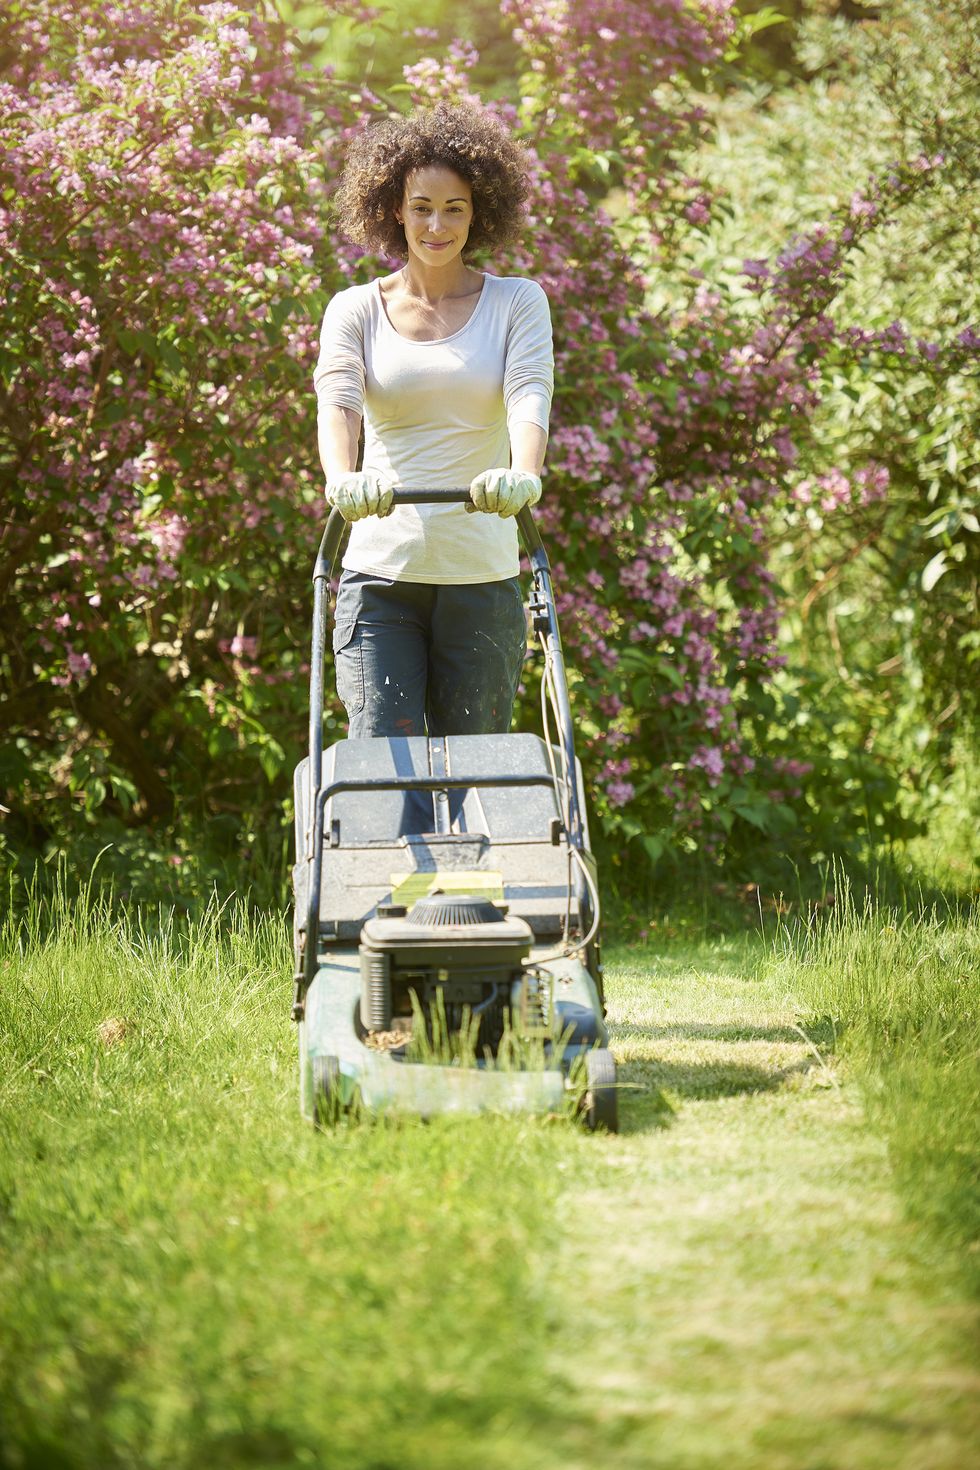 a woman is mowing the lawn